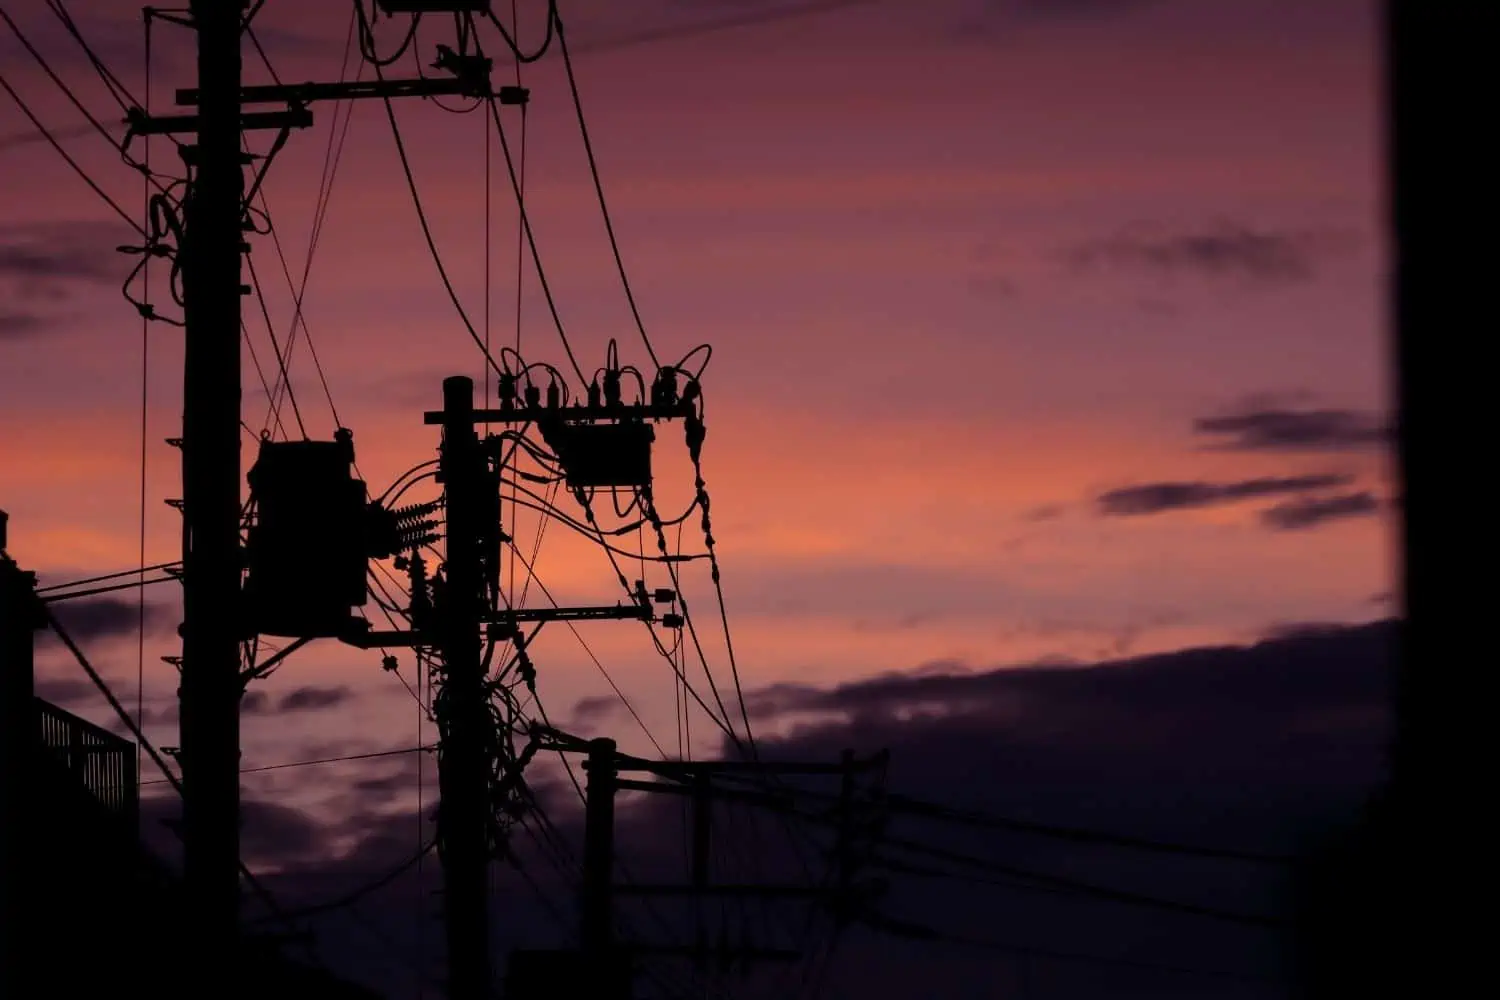 LOAD SHEDDING: Eskom hits South Africa with Stage 2